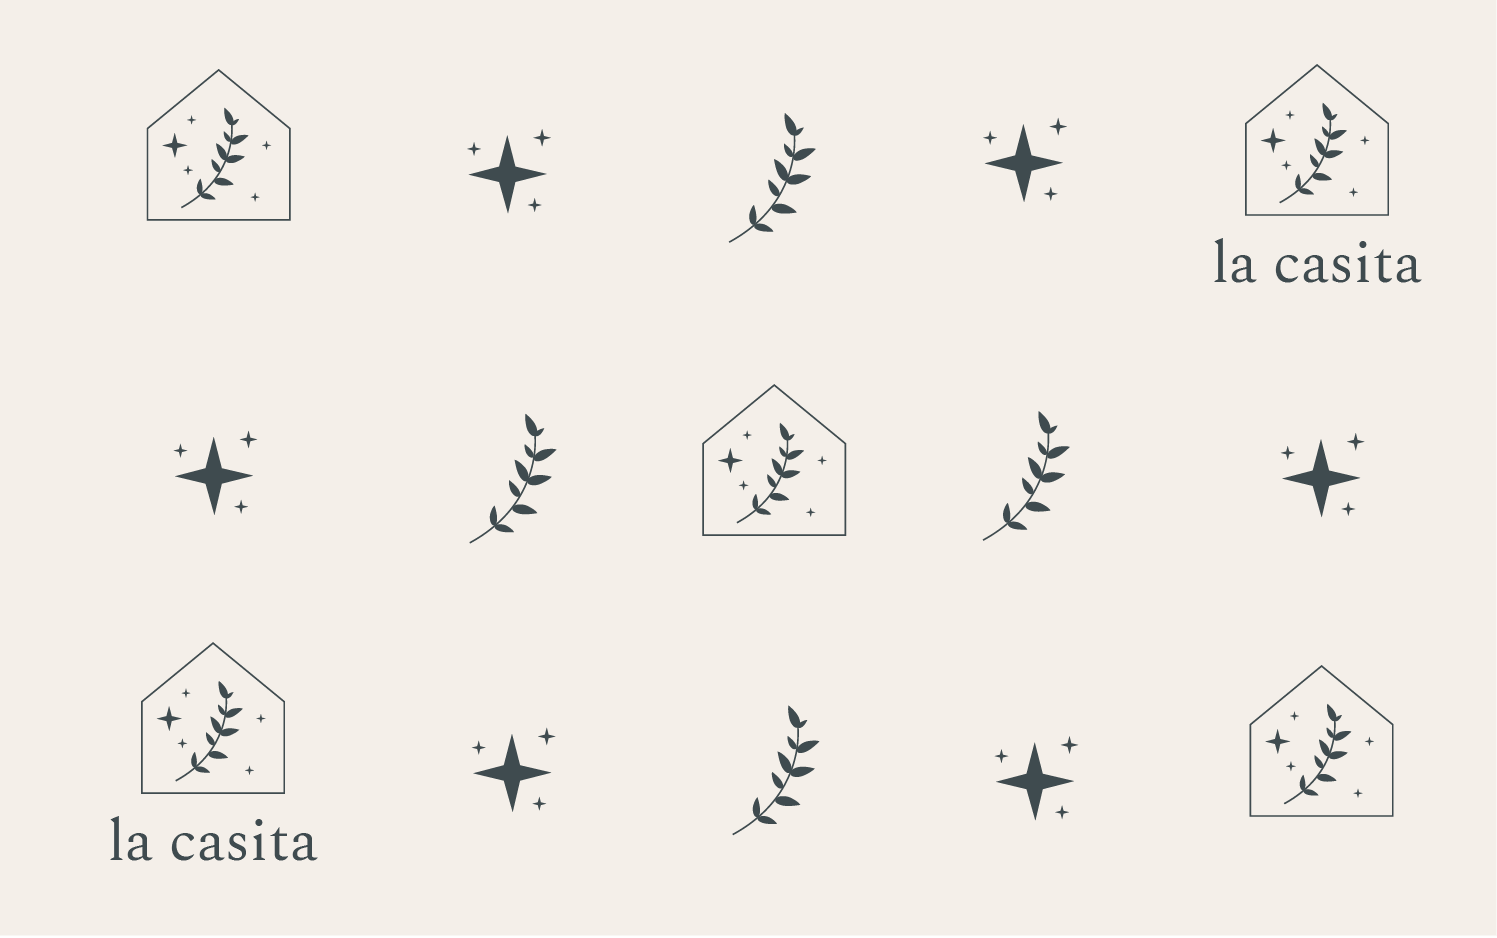 La Casita logos, branch elements and star elements in a pattern